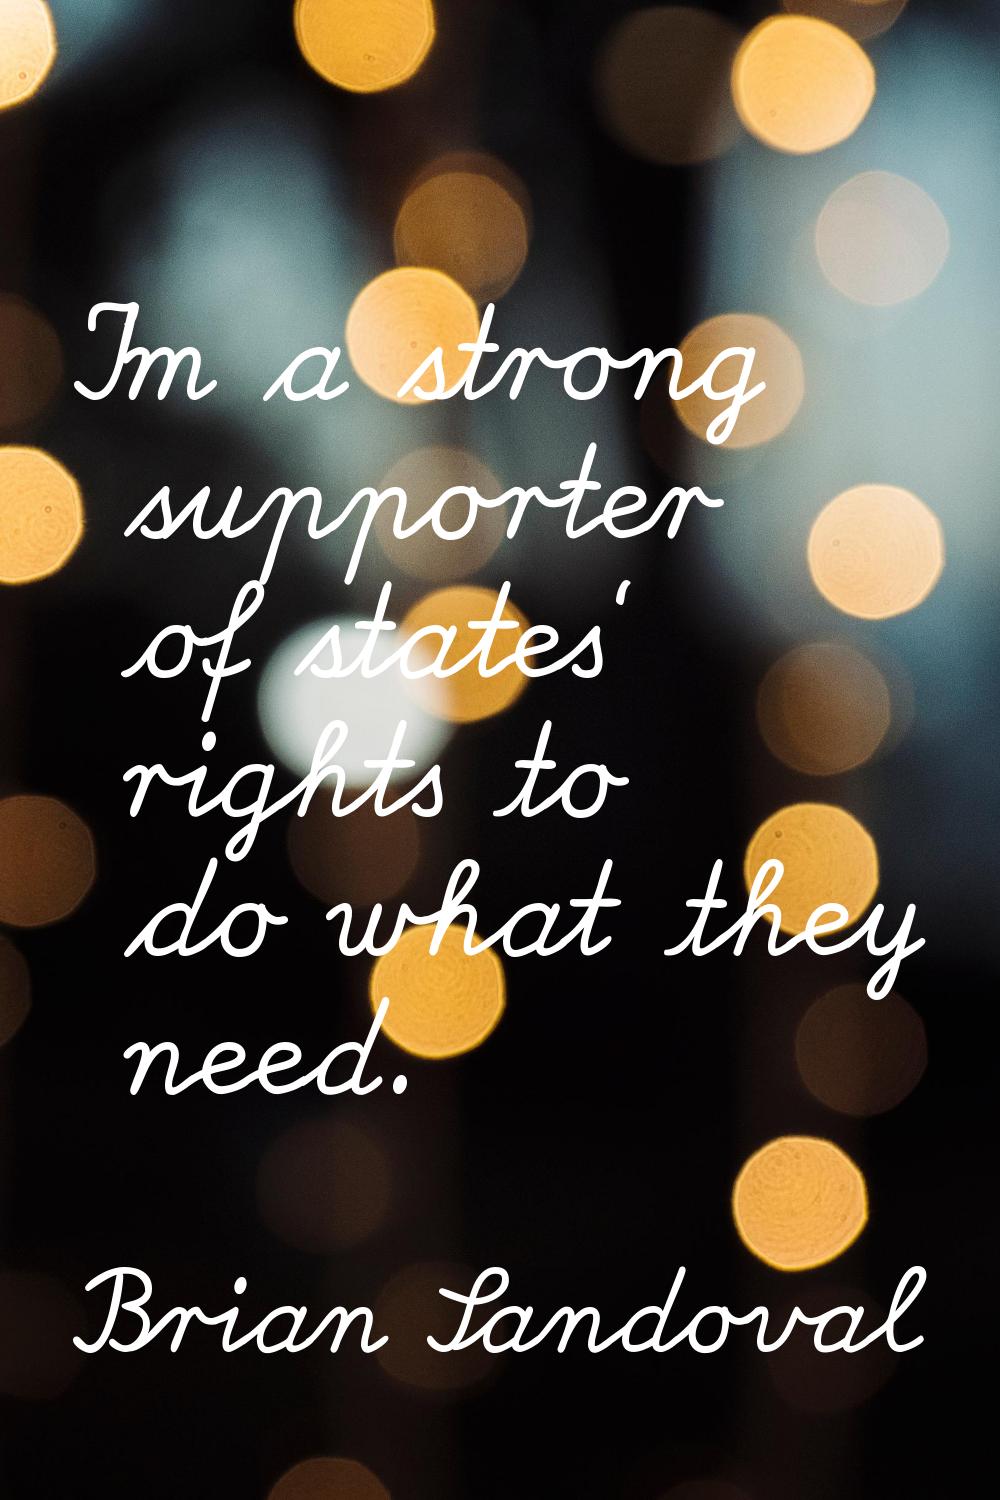 I'm a strong supporter of states' rights to do what they need.